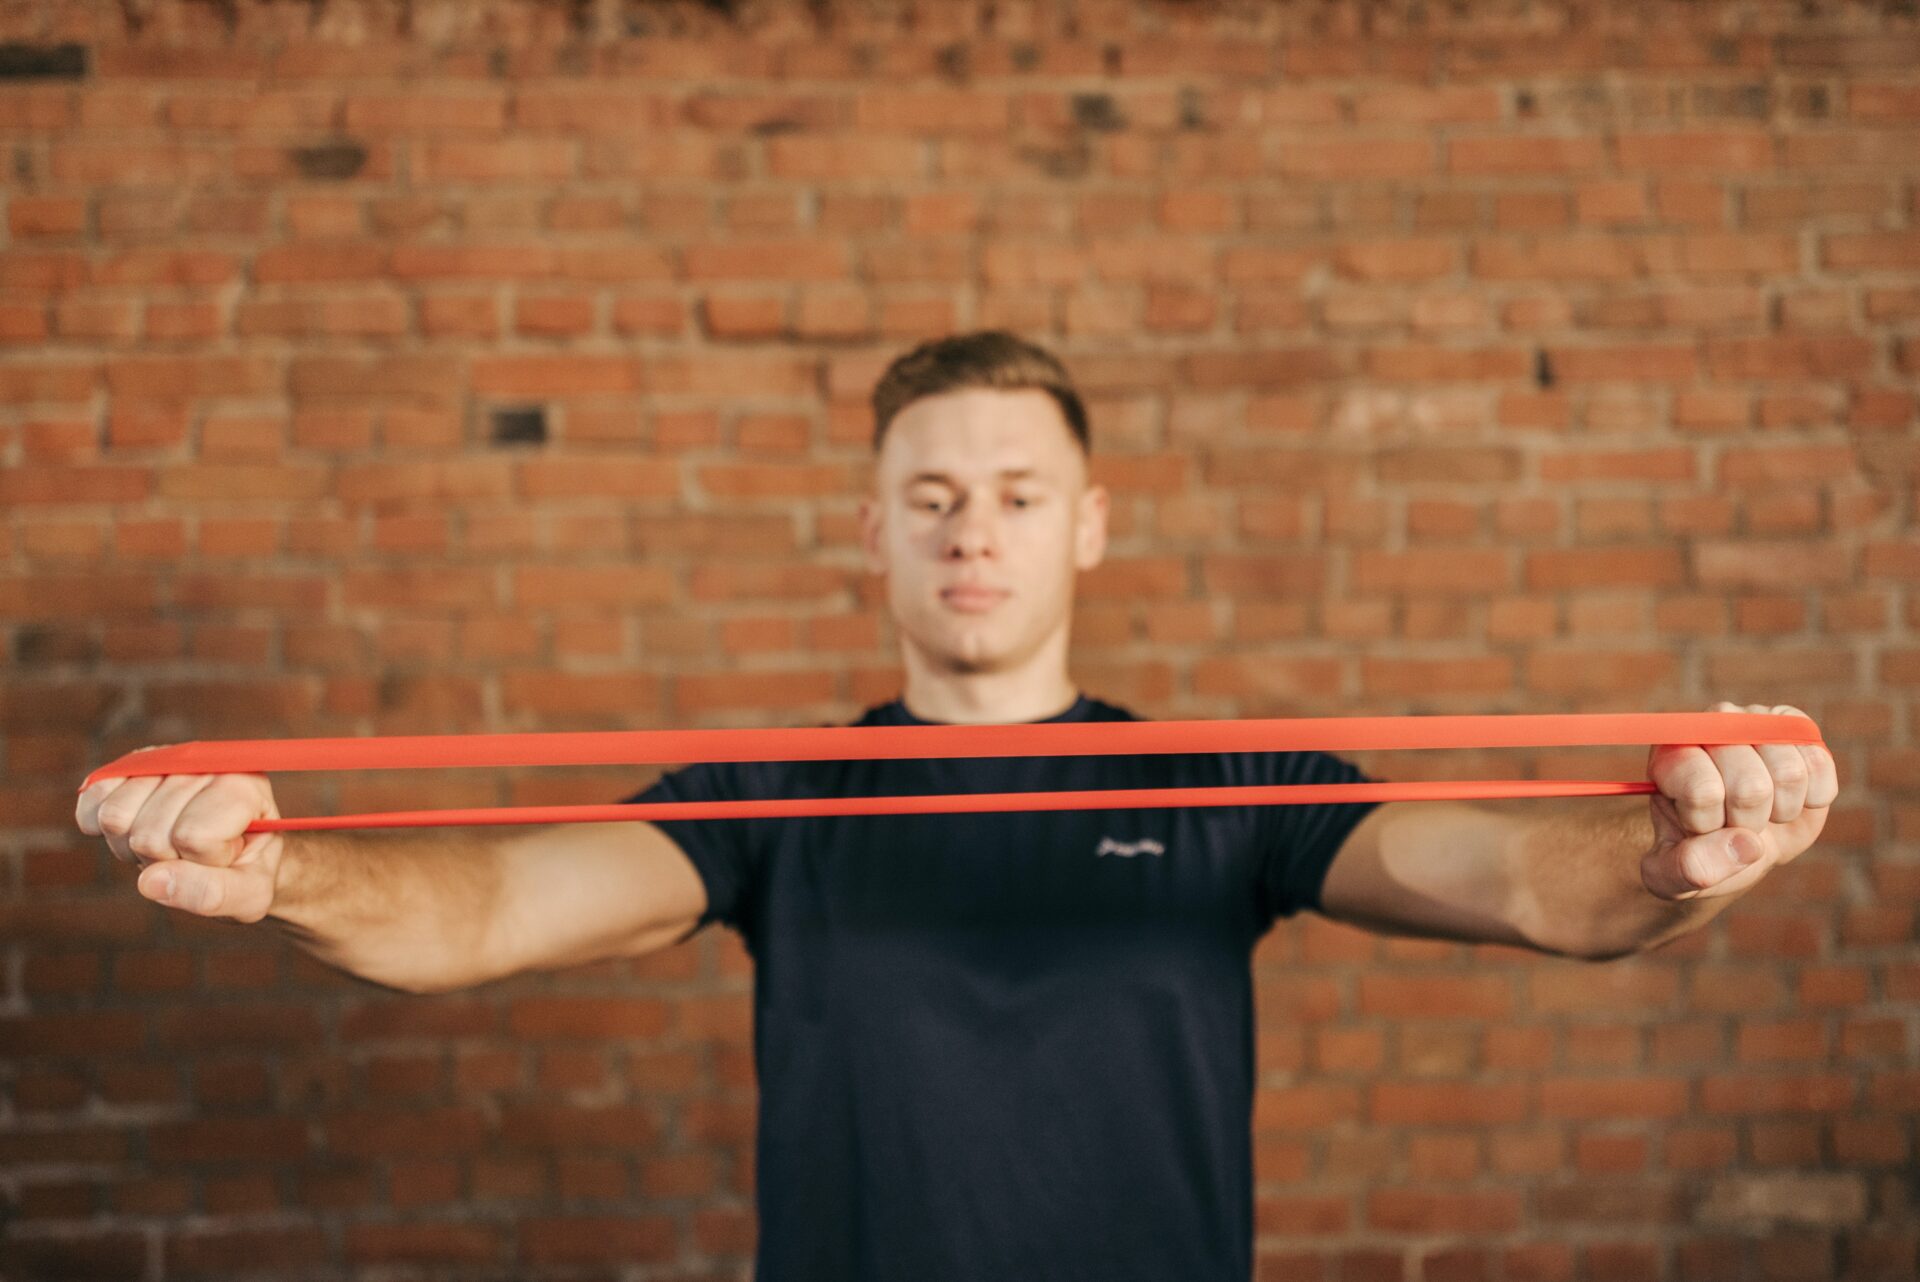 A guy stretching a resistance band between his outstretched arms